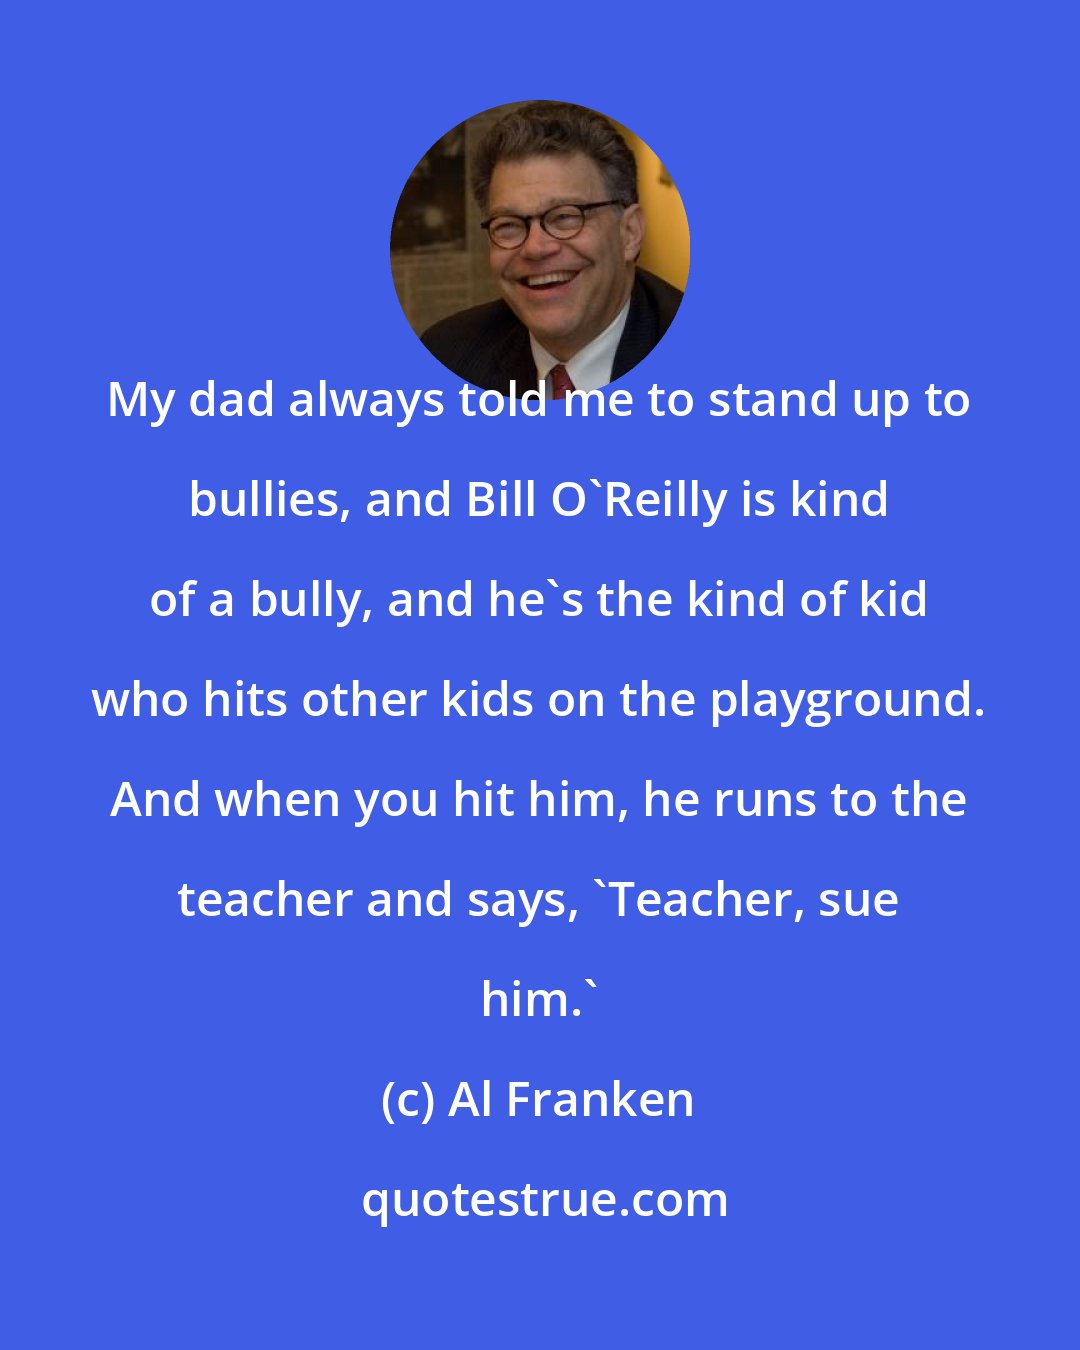 Al Franken: My dad always told me to stand up to bullies, and Bill O'Reilly is kind of a bully, and he's the kind of kid who hits other kids on the playground. And when you hit him, he runs to the teacher and says, 'Teacher, sue him.'